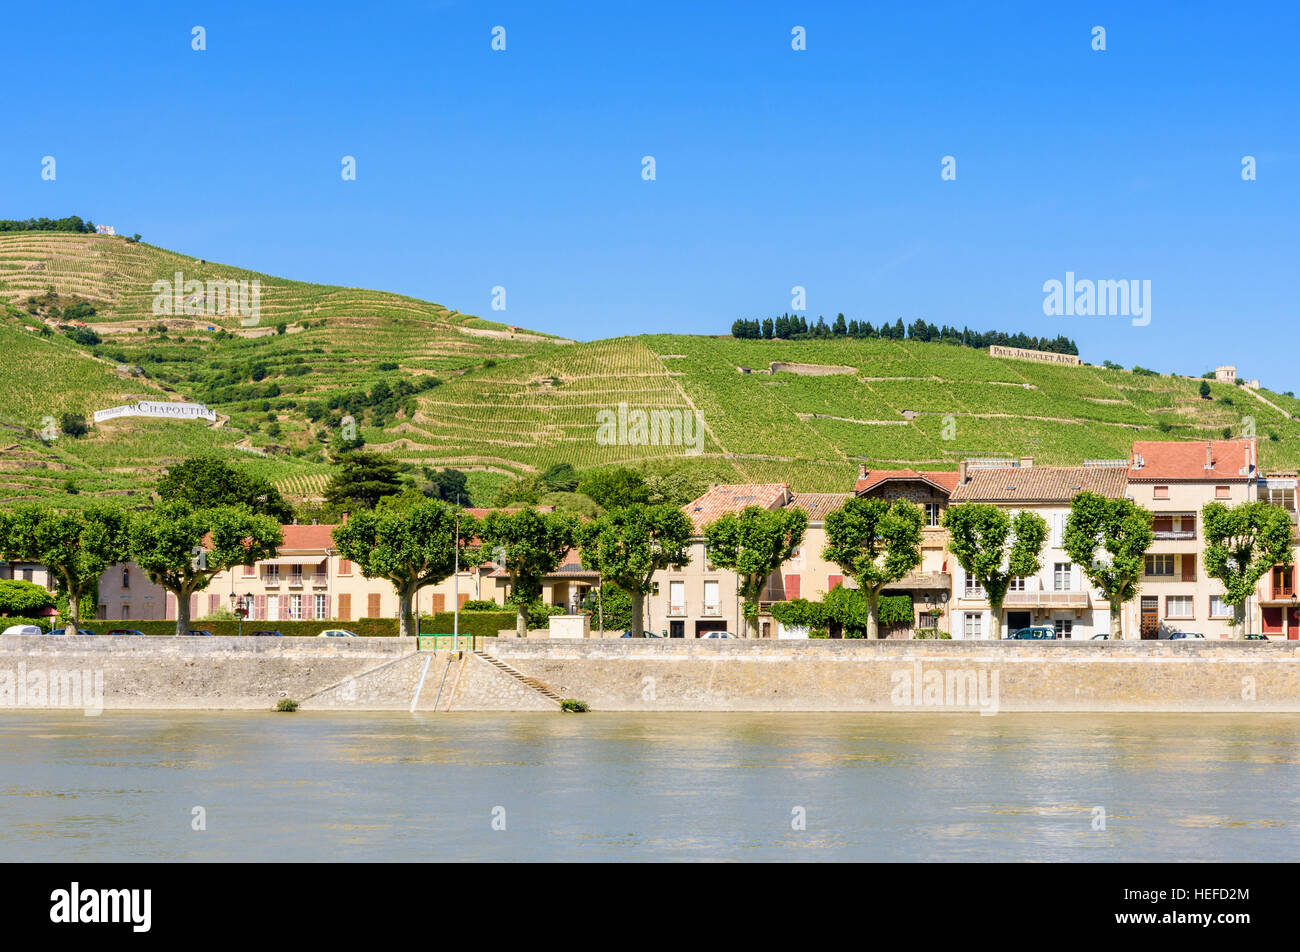 Views of the Hill of Hermitage overlooking the left bank of the Rhône River at the town of Tain-l'Hermitage, Drôme, France Stock Photo